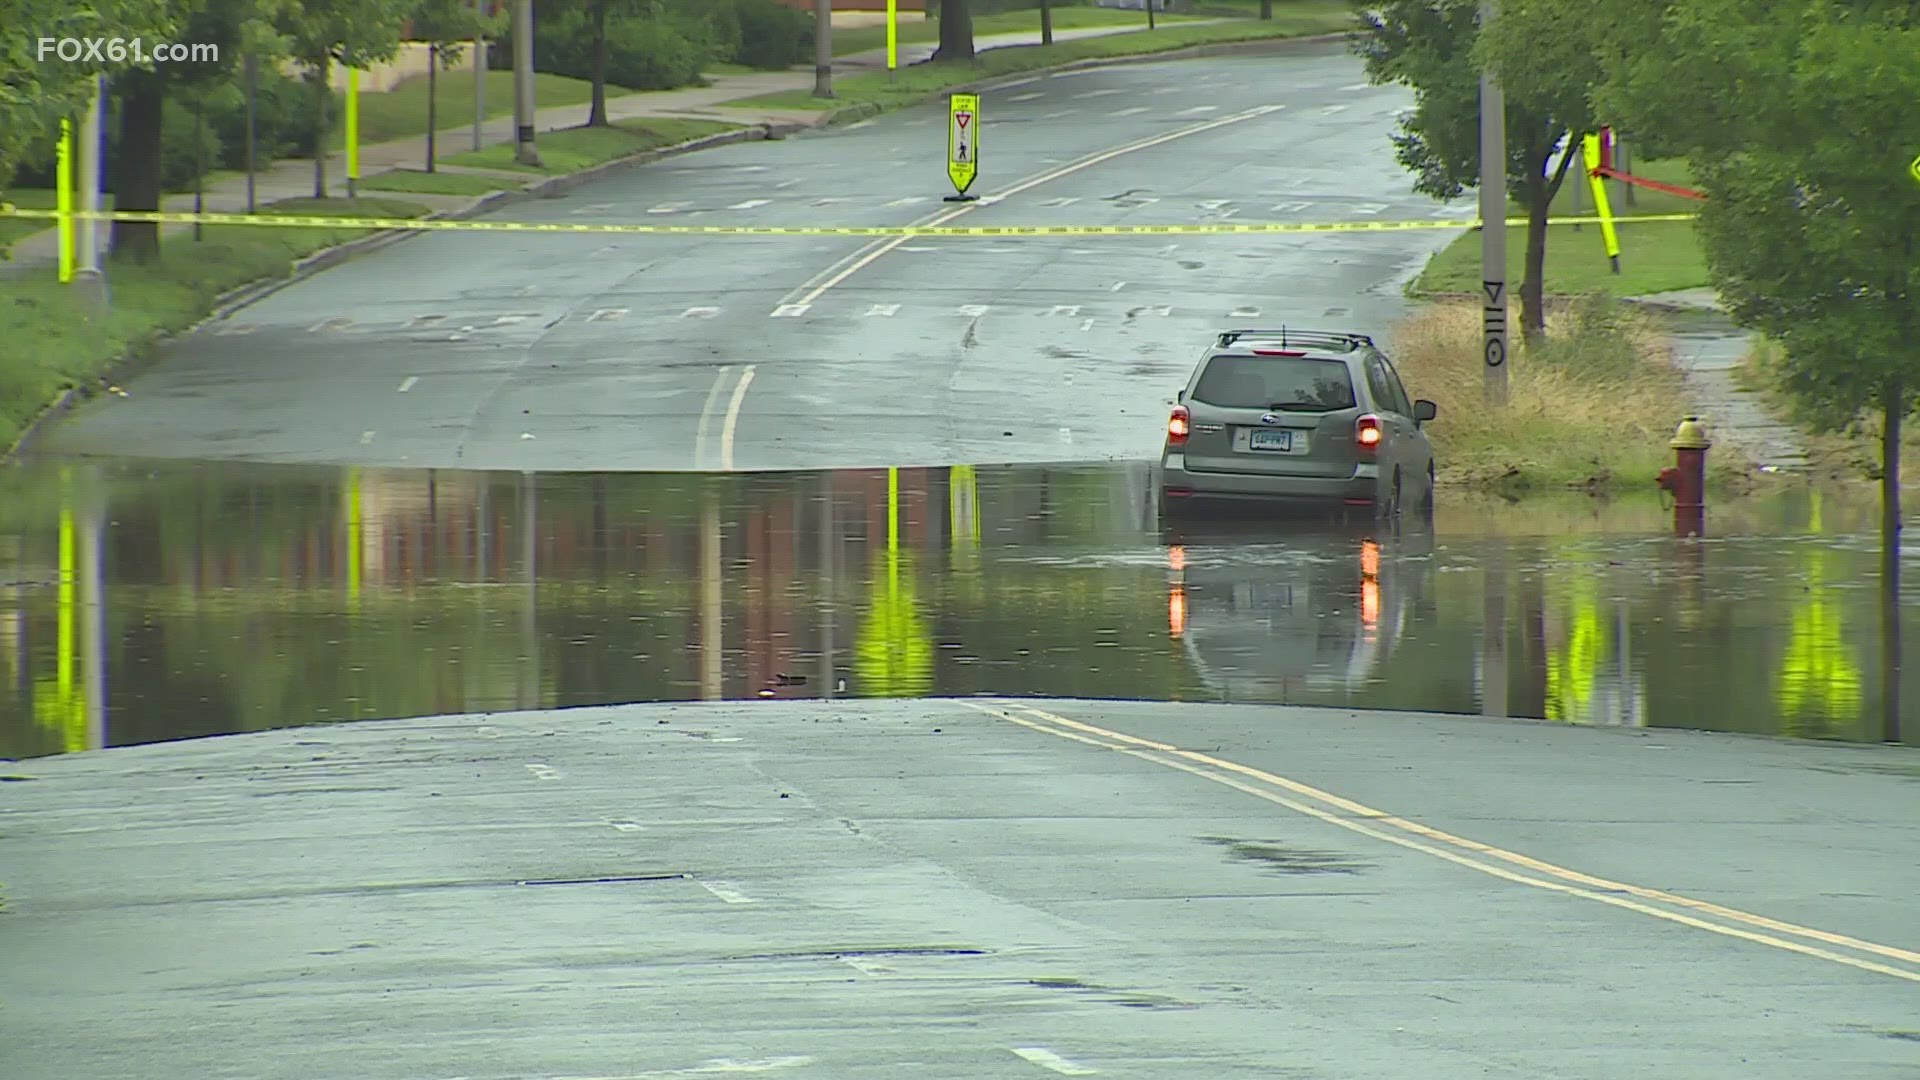 Heavy downpours lead to flash flooding, making West Hartford's roads and backyards look more like a lake.